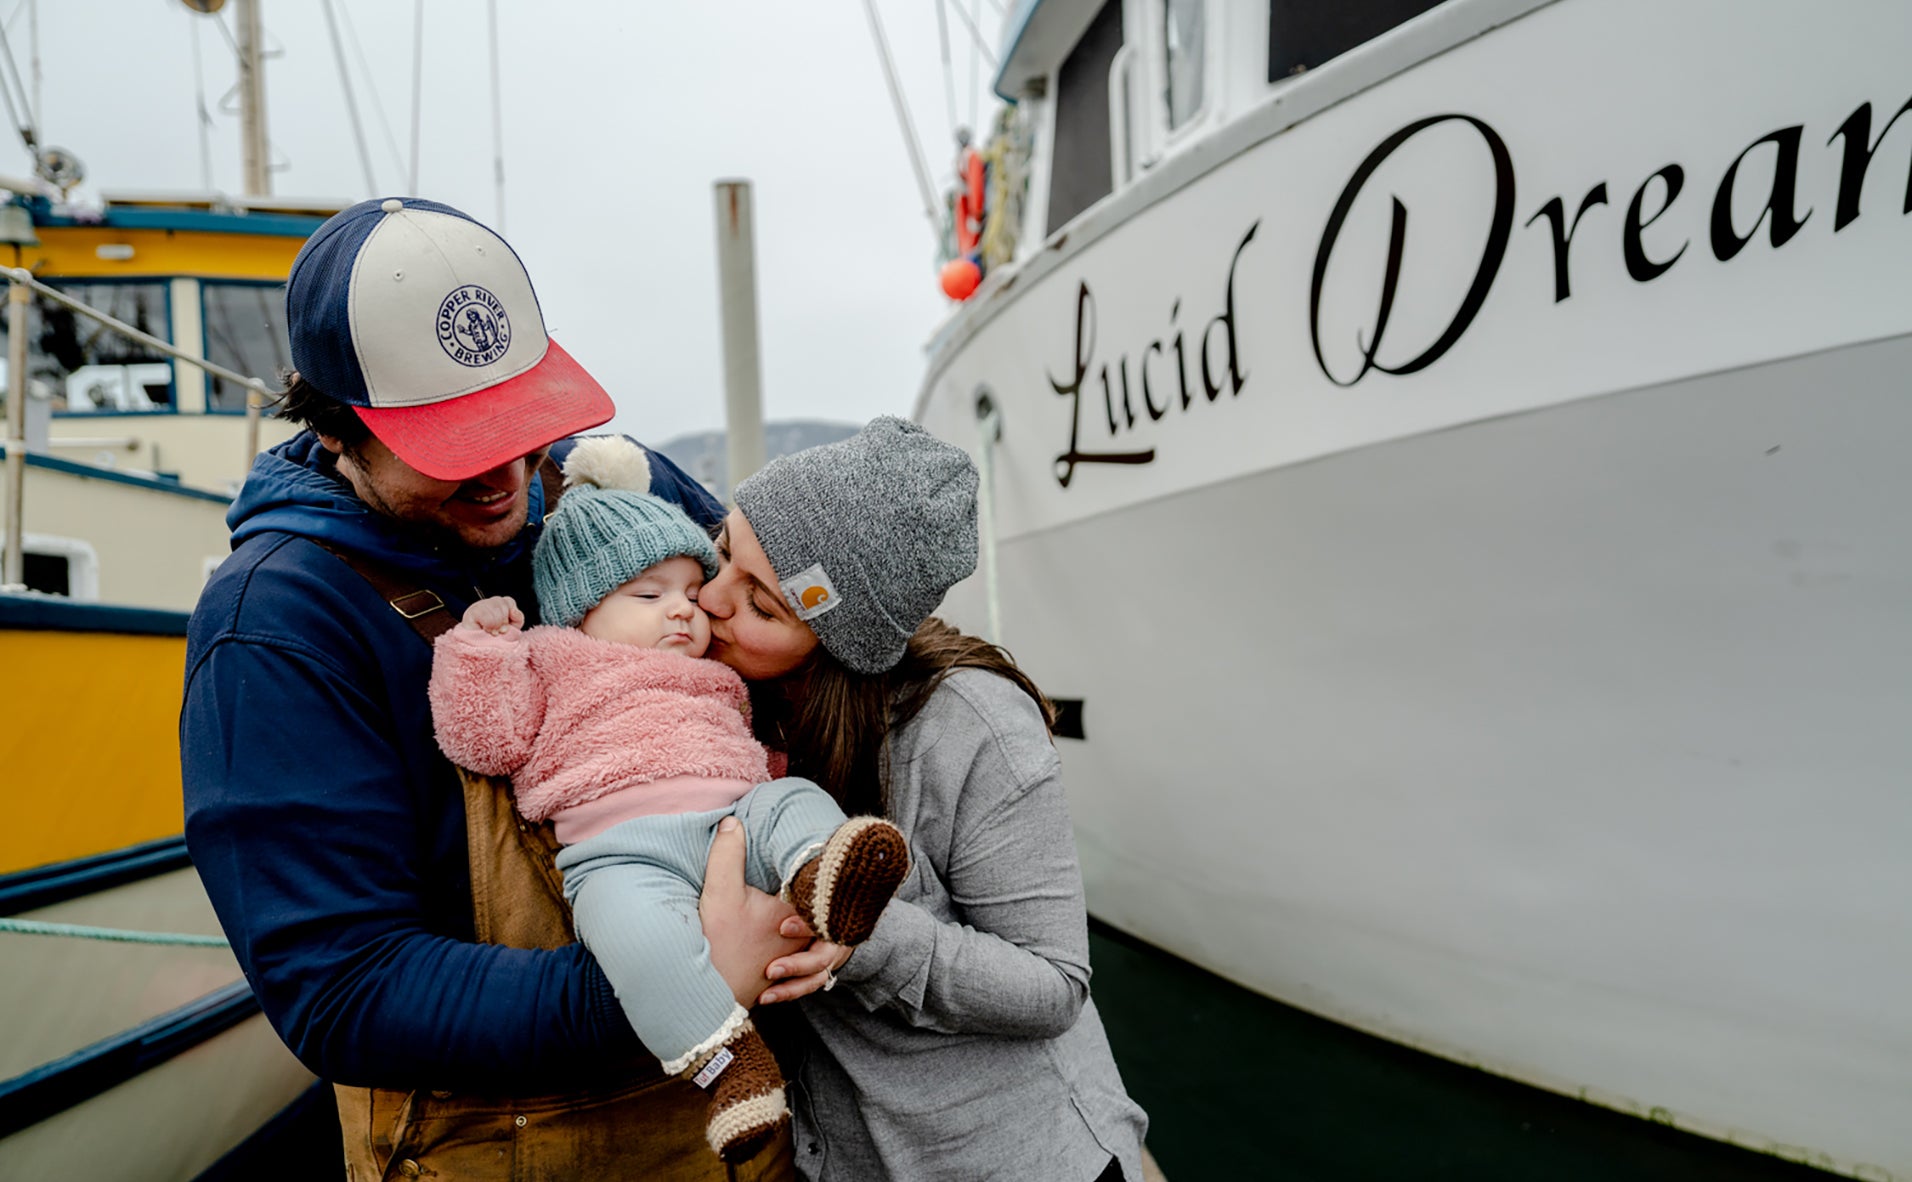 e, Kinsey and their daughter, Odette, in front of their fishing vessel Lucid Dream.